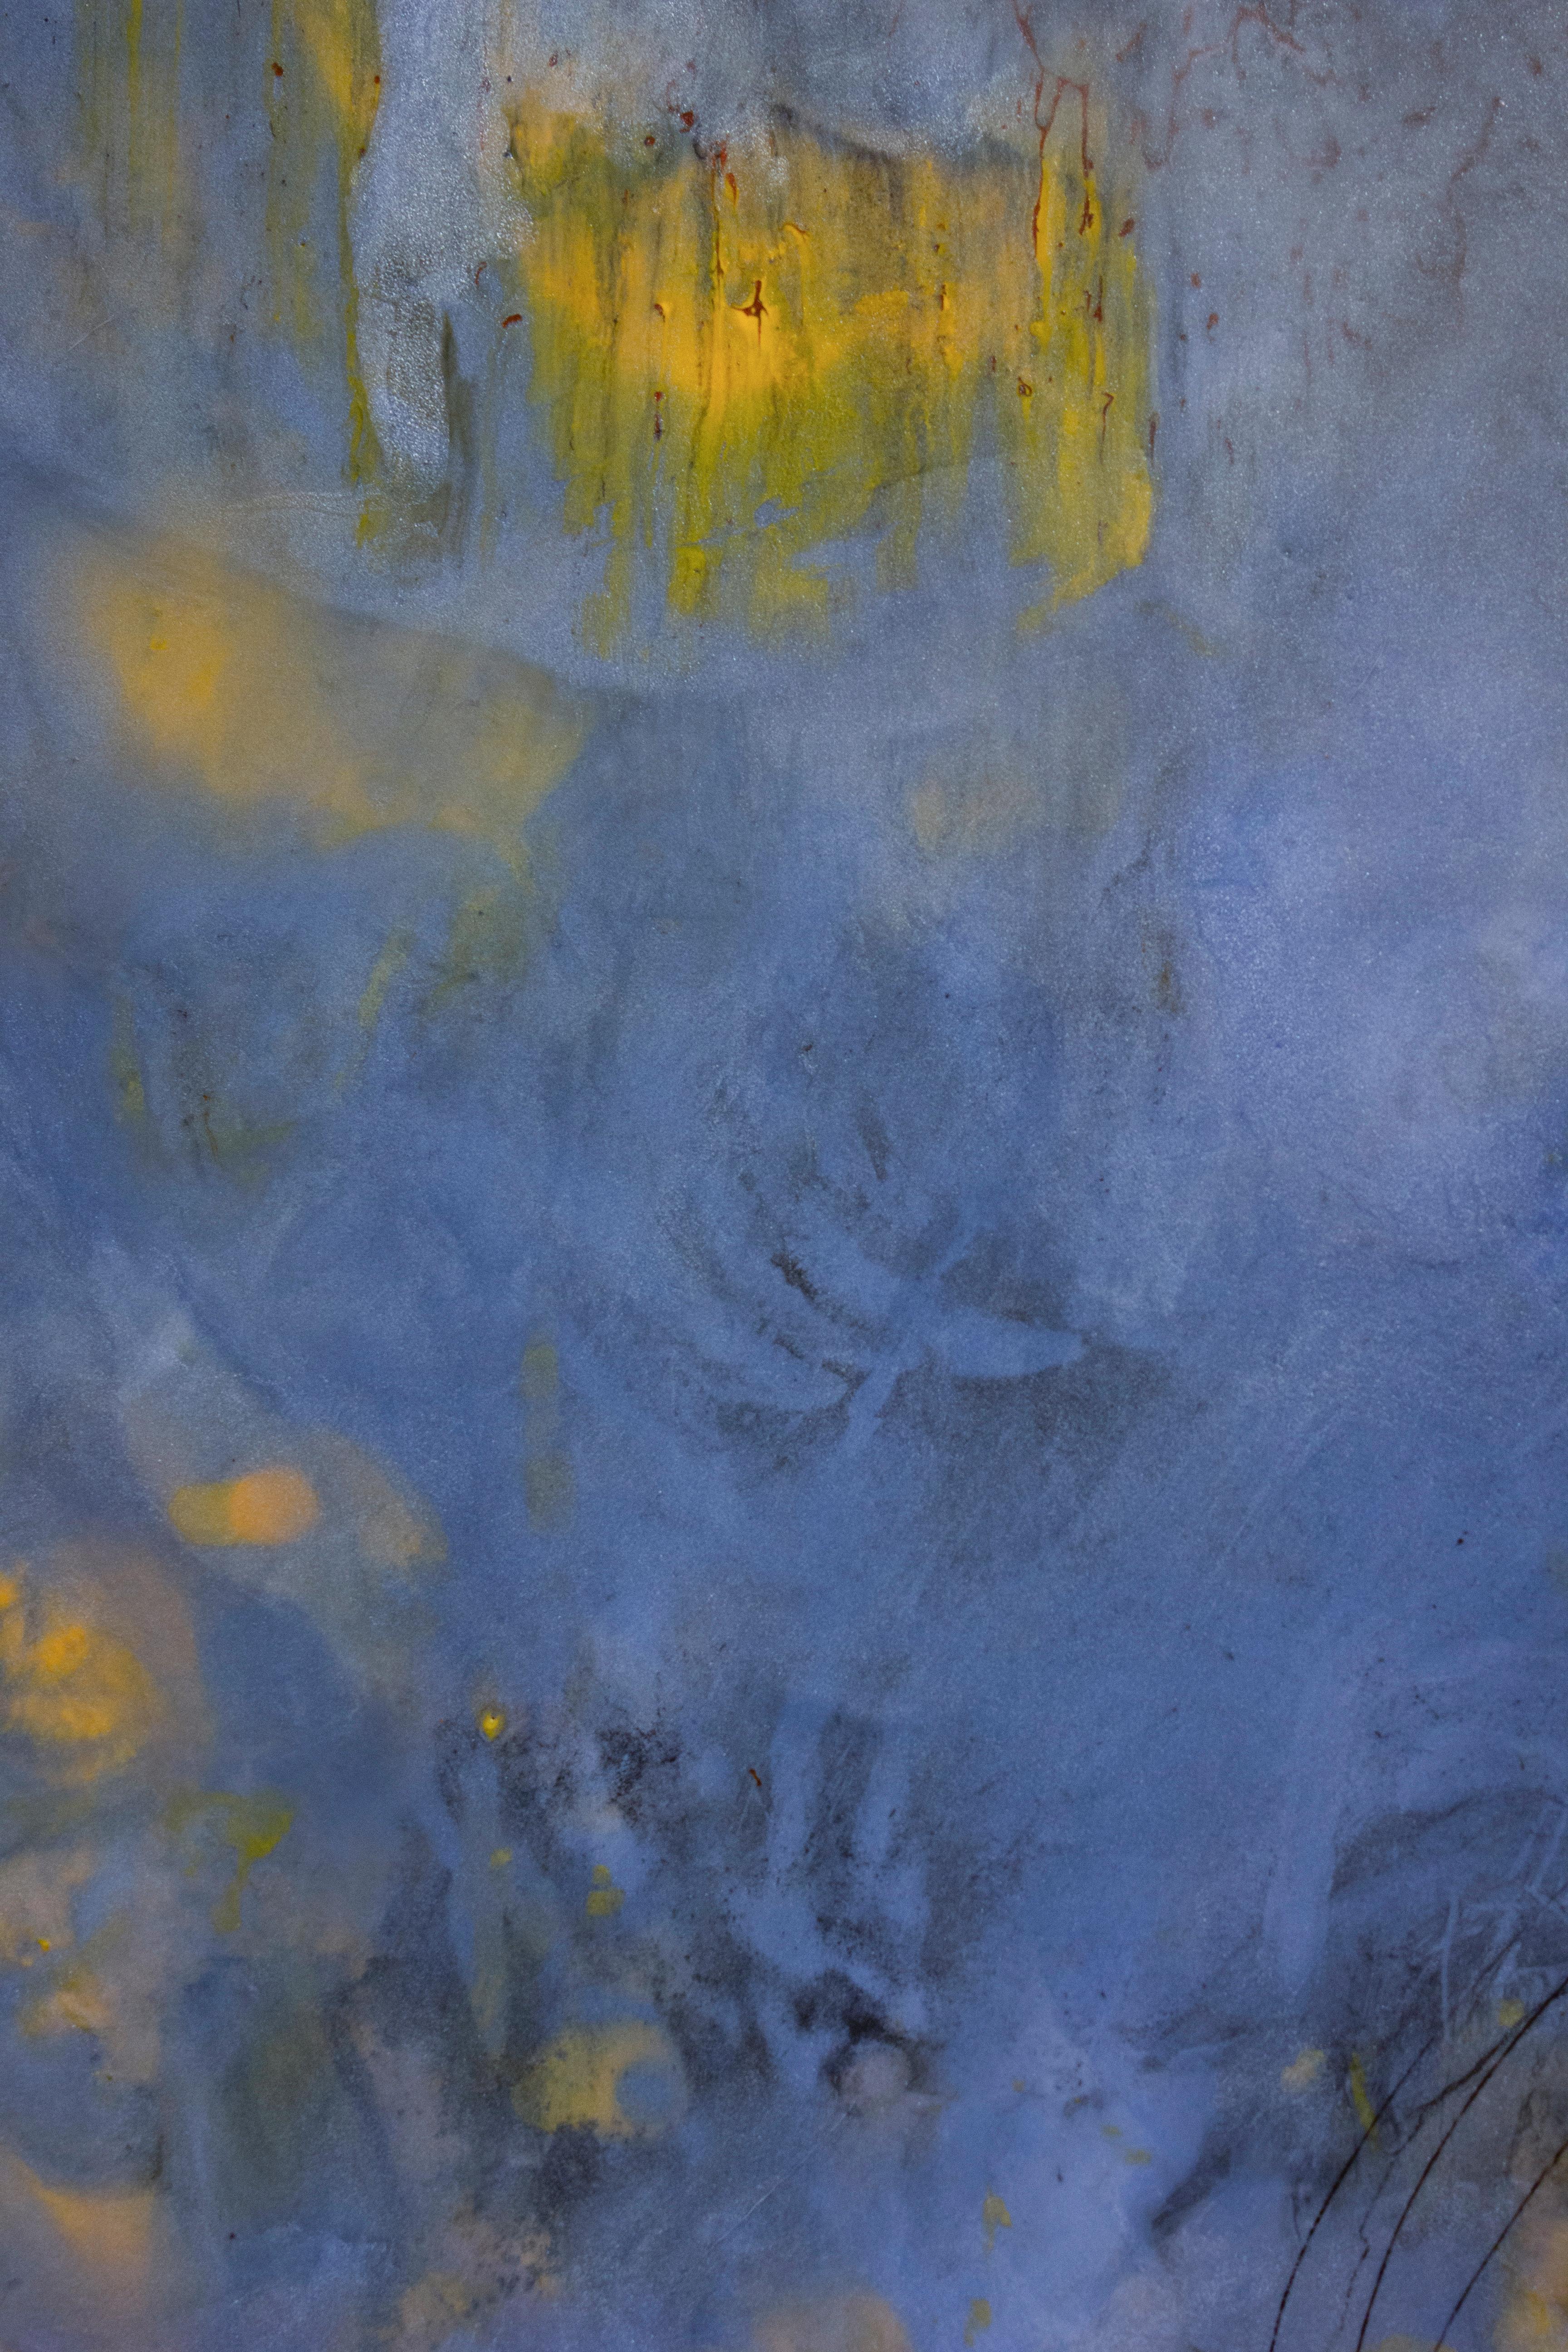 A vertical encaustic painting in vibrant blues and yellows. Gibson's abstract work often references the natural world, and the unique dimensions of this work combined with its beautiful color palette form an image reminiscent of a morning sky